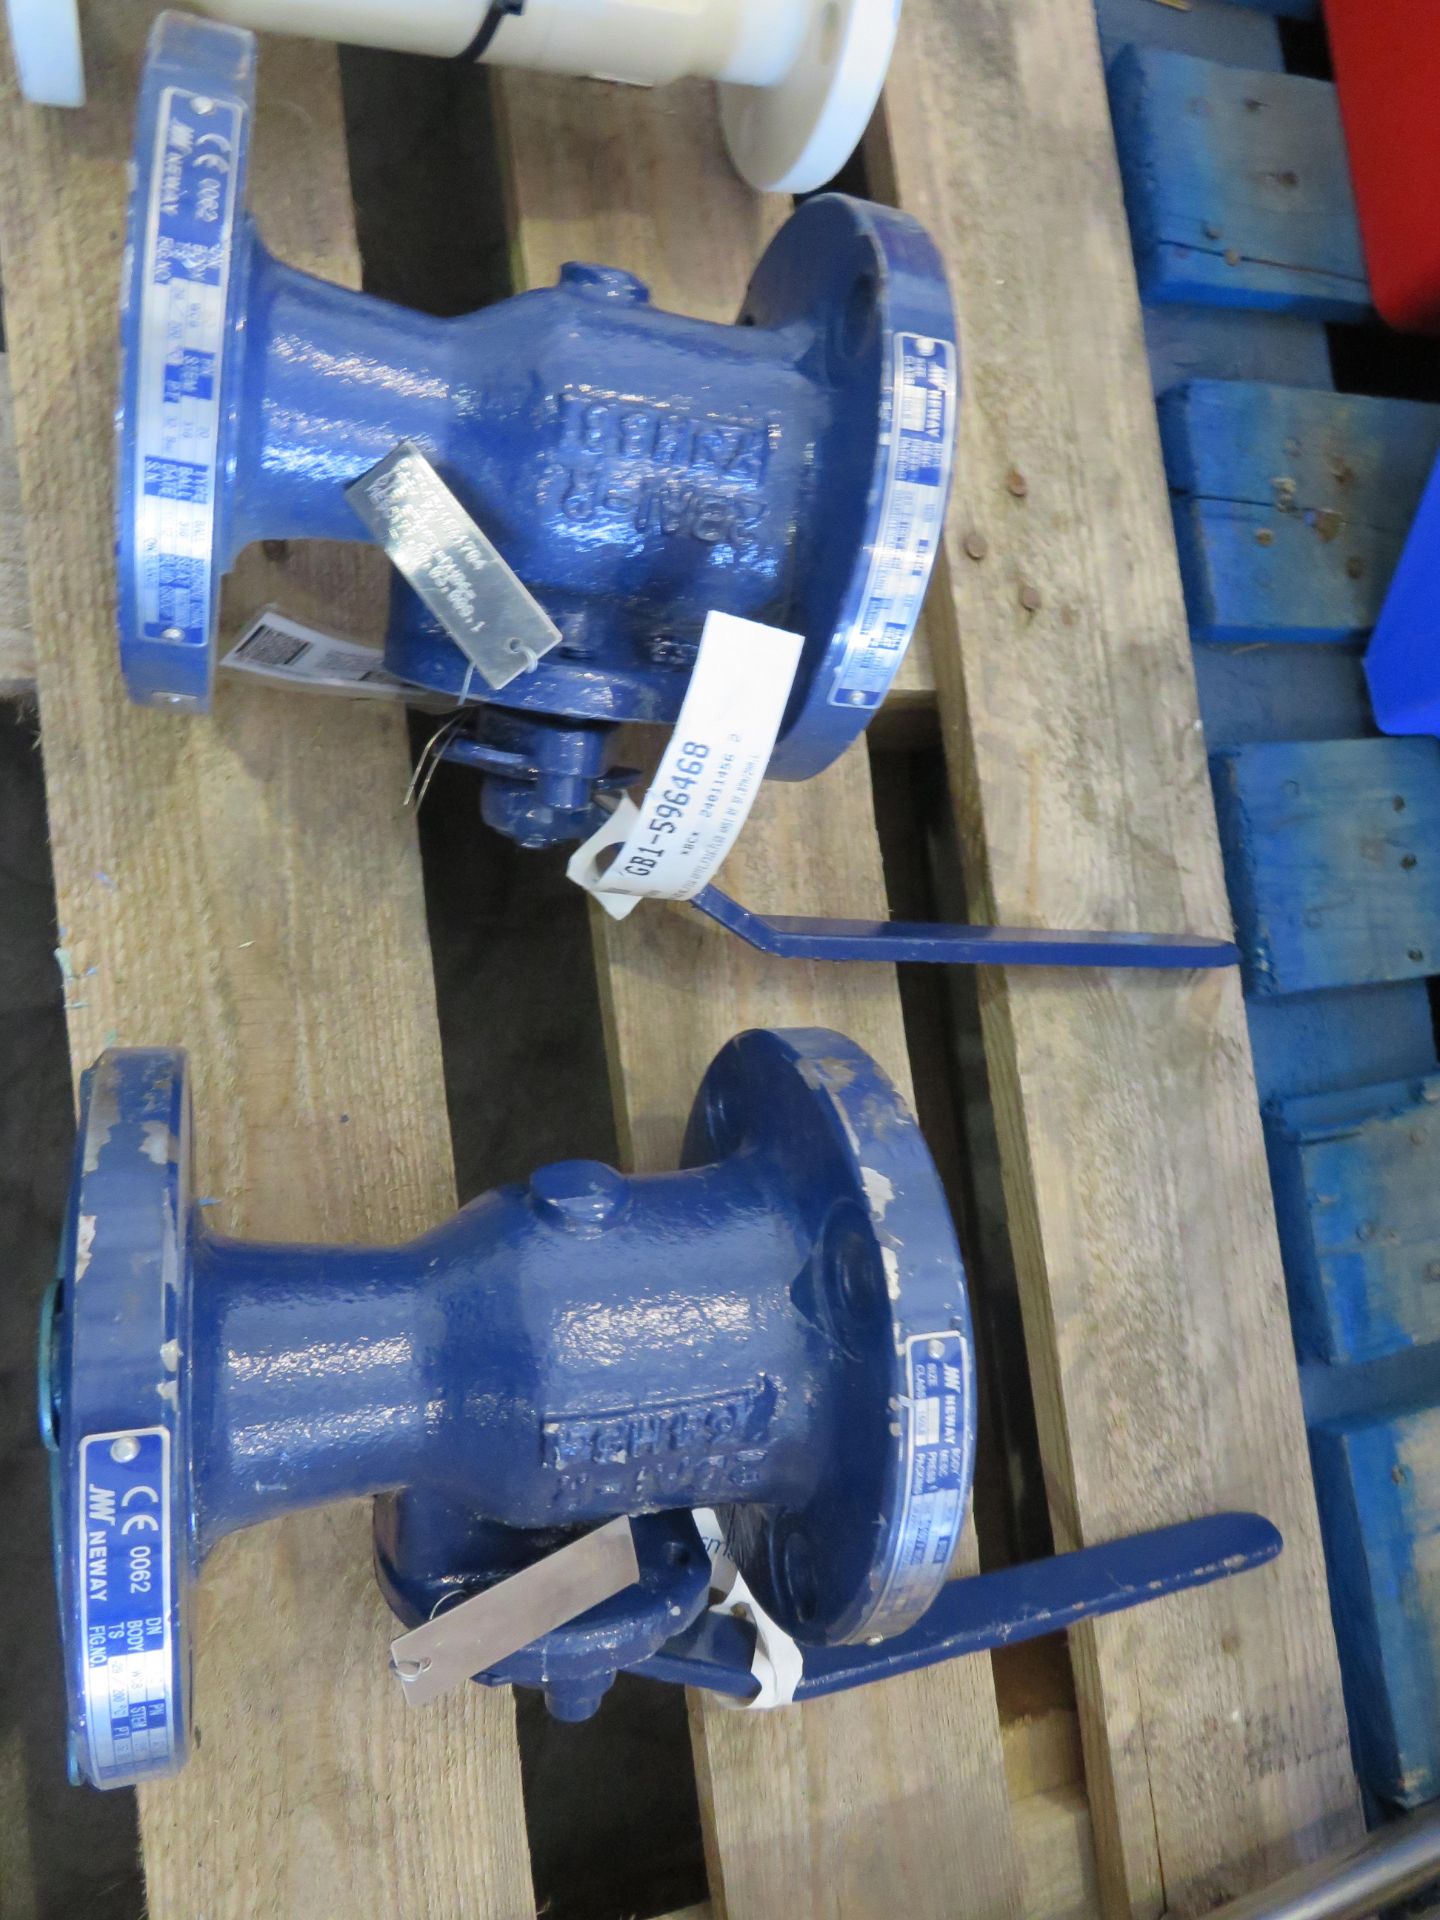 6 X VARIOUS UNUSED WHEEL VALVES, 2 X NEWAY 150LB BALL VALVES AND 2 X - Image 3 of 4